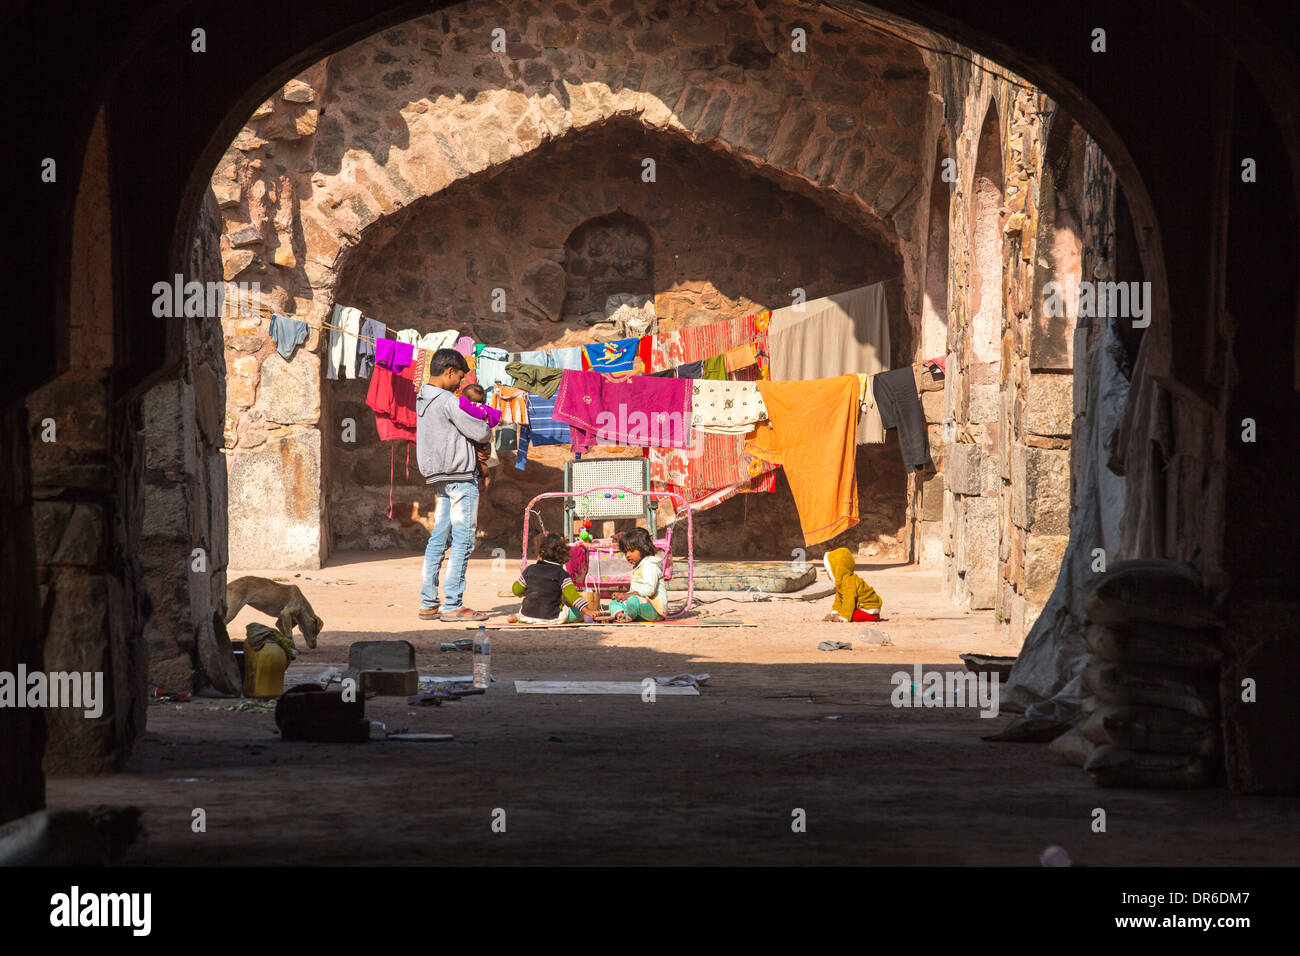 A poor family making their home in old tunnels in the Purana Qila fort in Delhi; India. Stock Photo